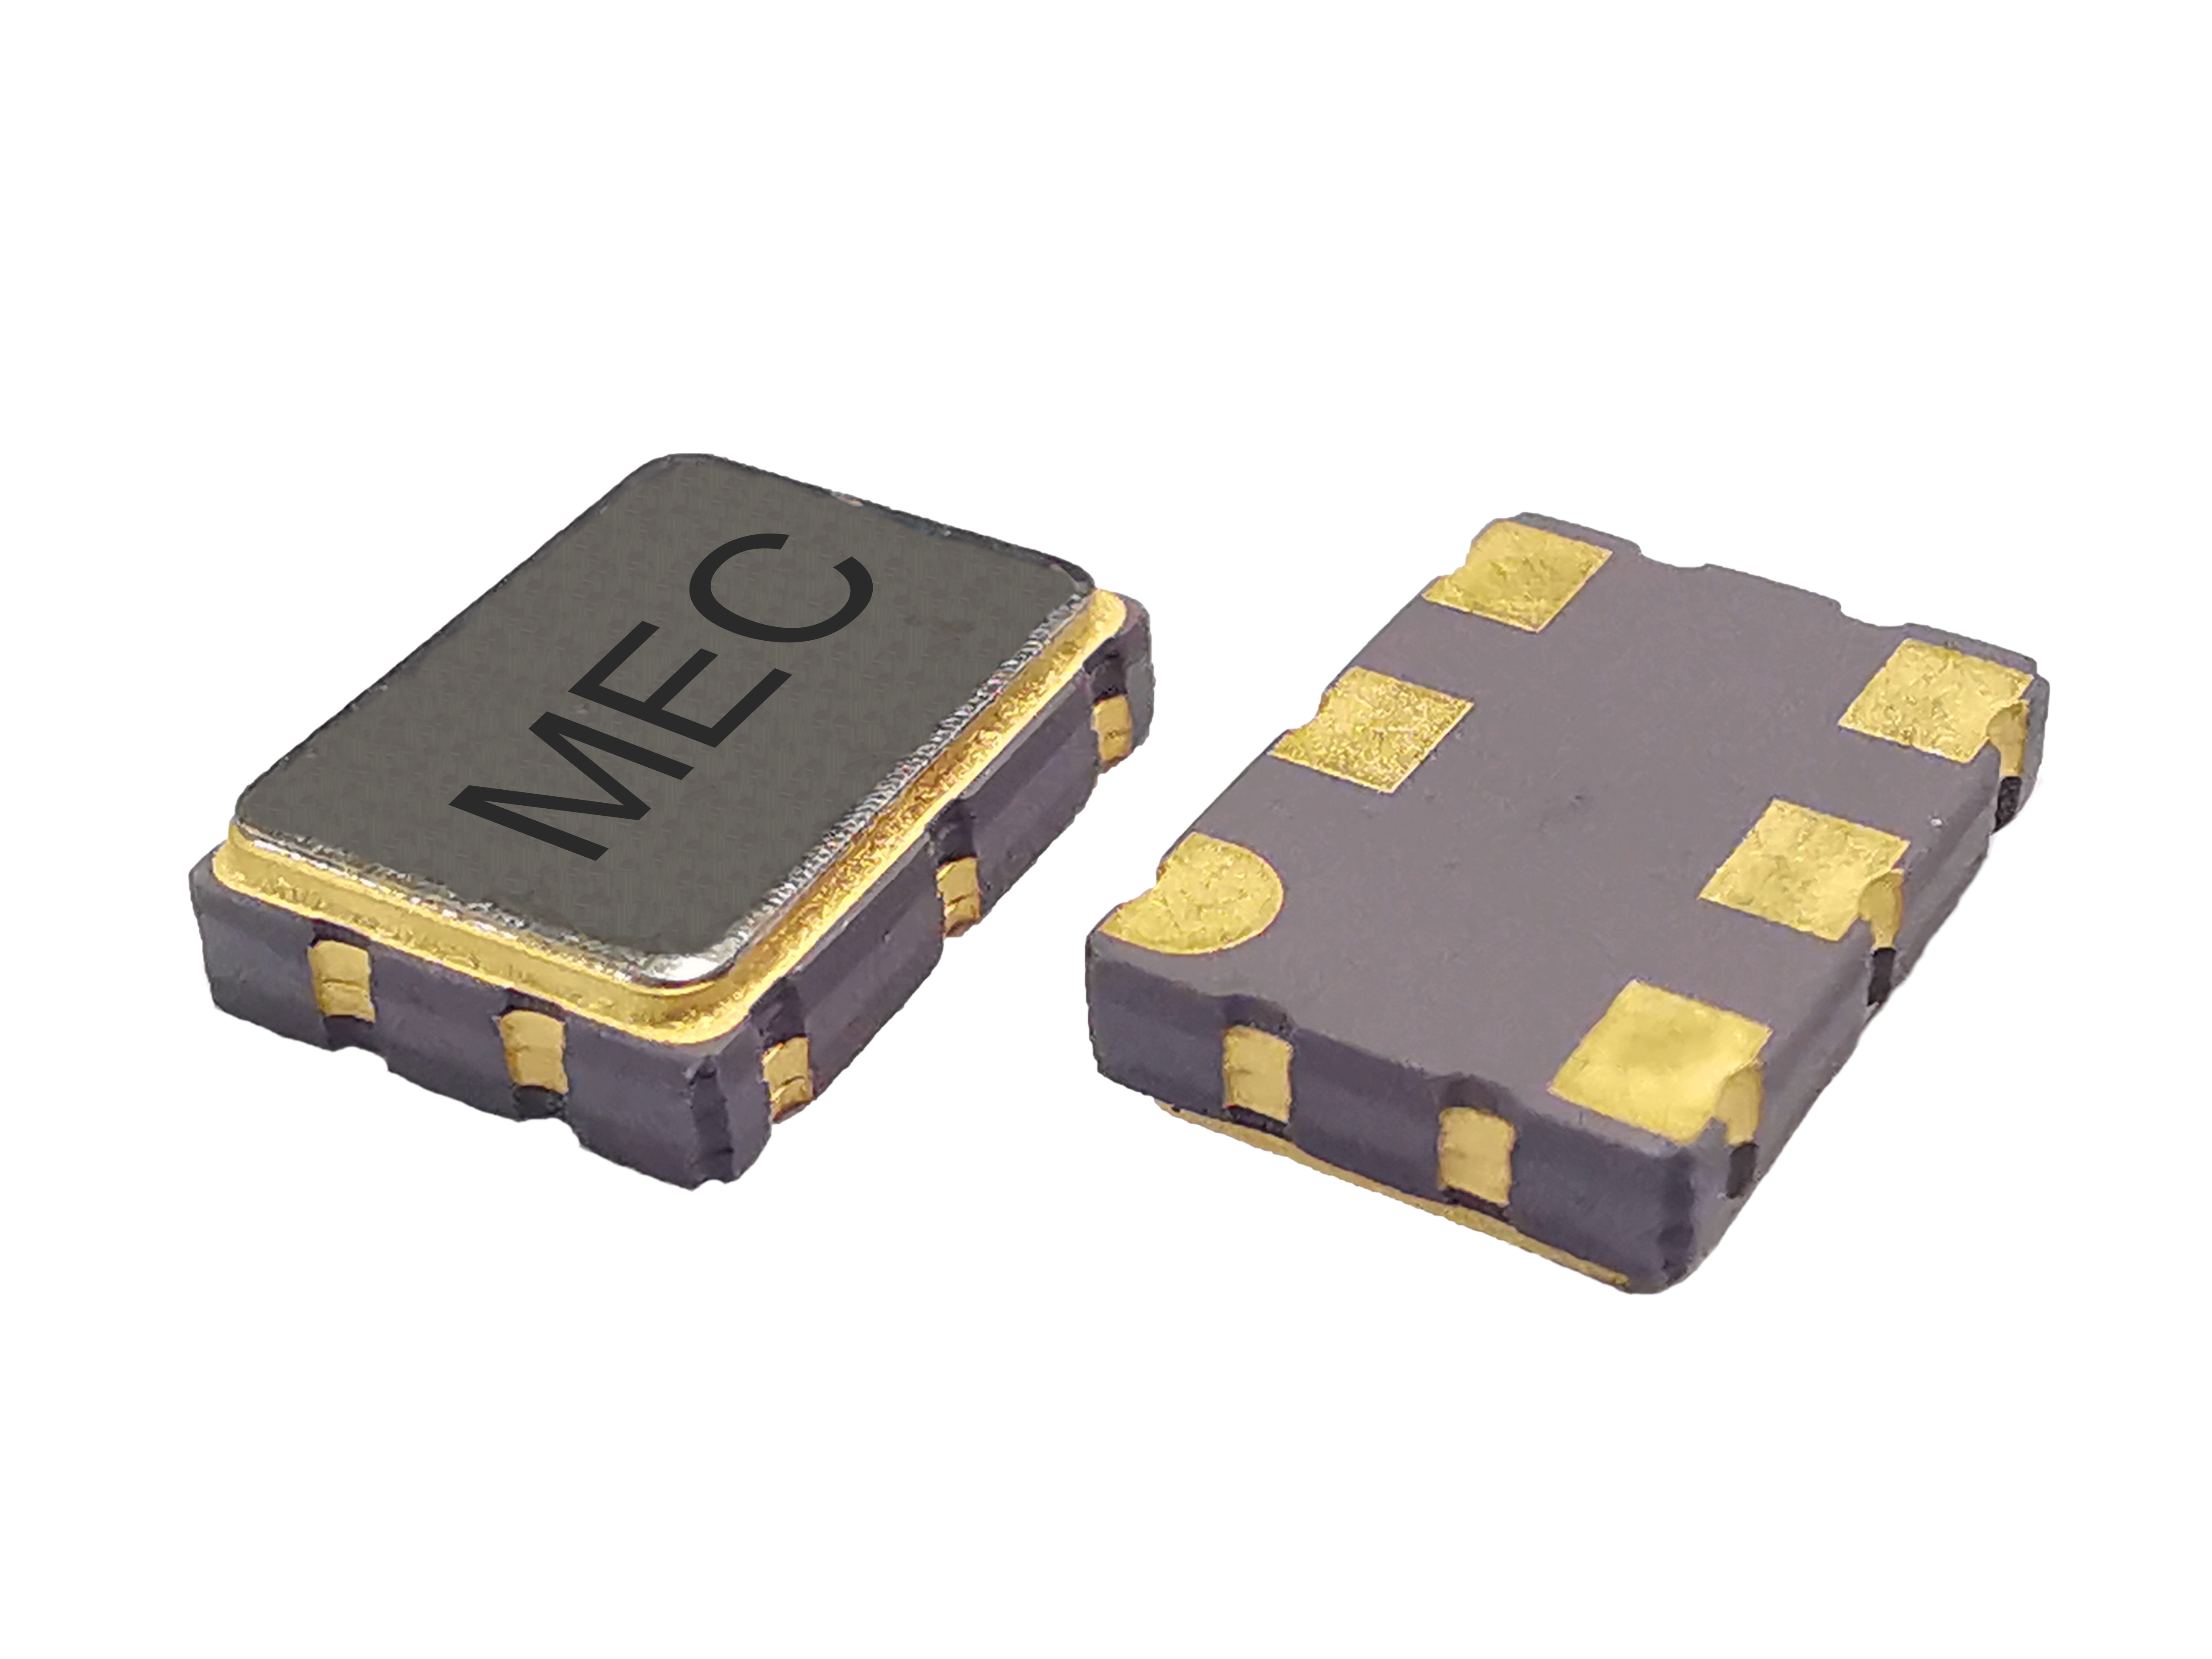 HCPQF576 7050 2.5V Quick-Turn Programmable Frequency Swithable Differential LVPECL SMD Crystal Oscillator